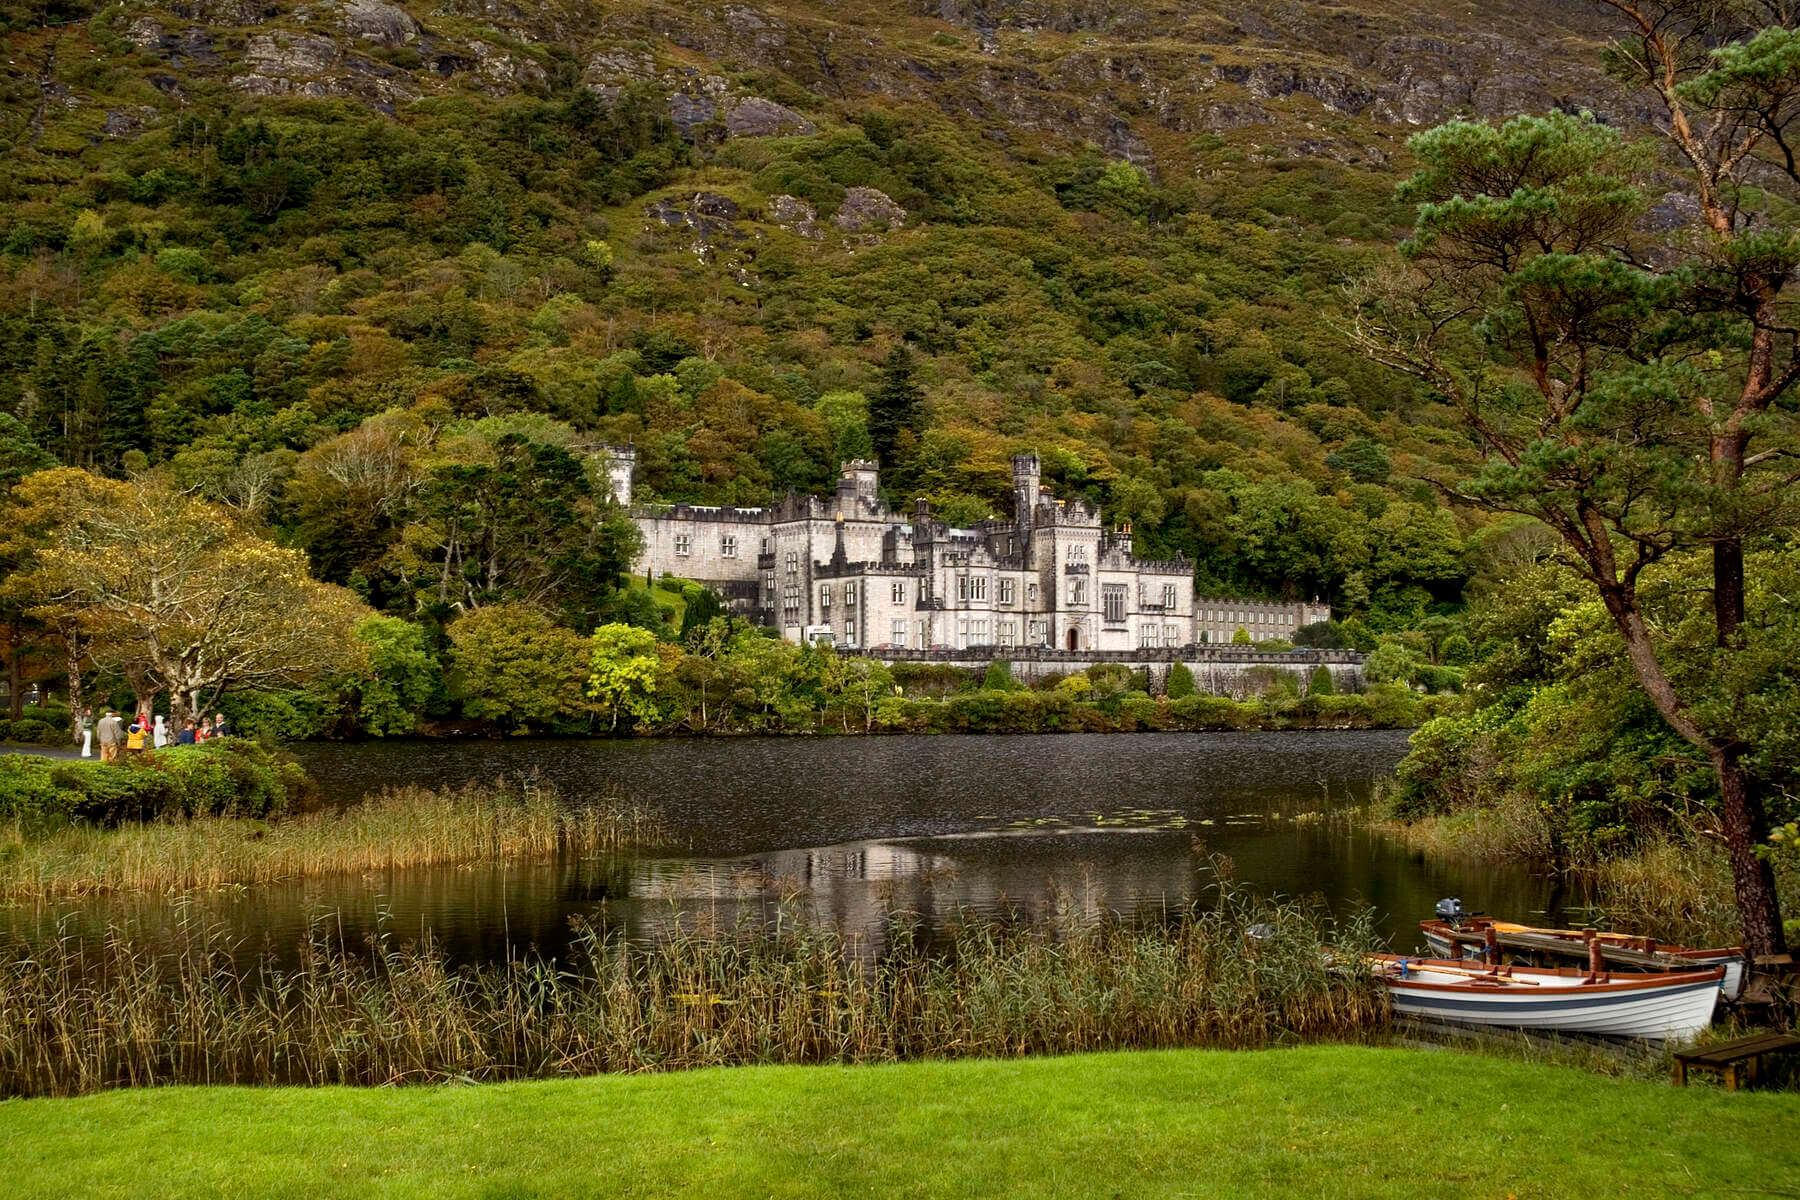 Kylemore Abbey am Ufer des Lough Pollacapall in Connemara, County Galway.